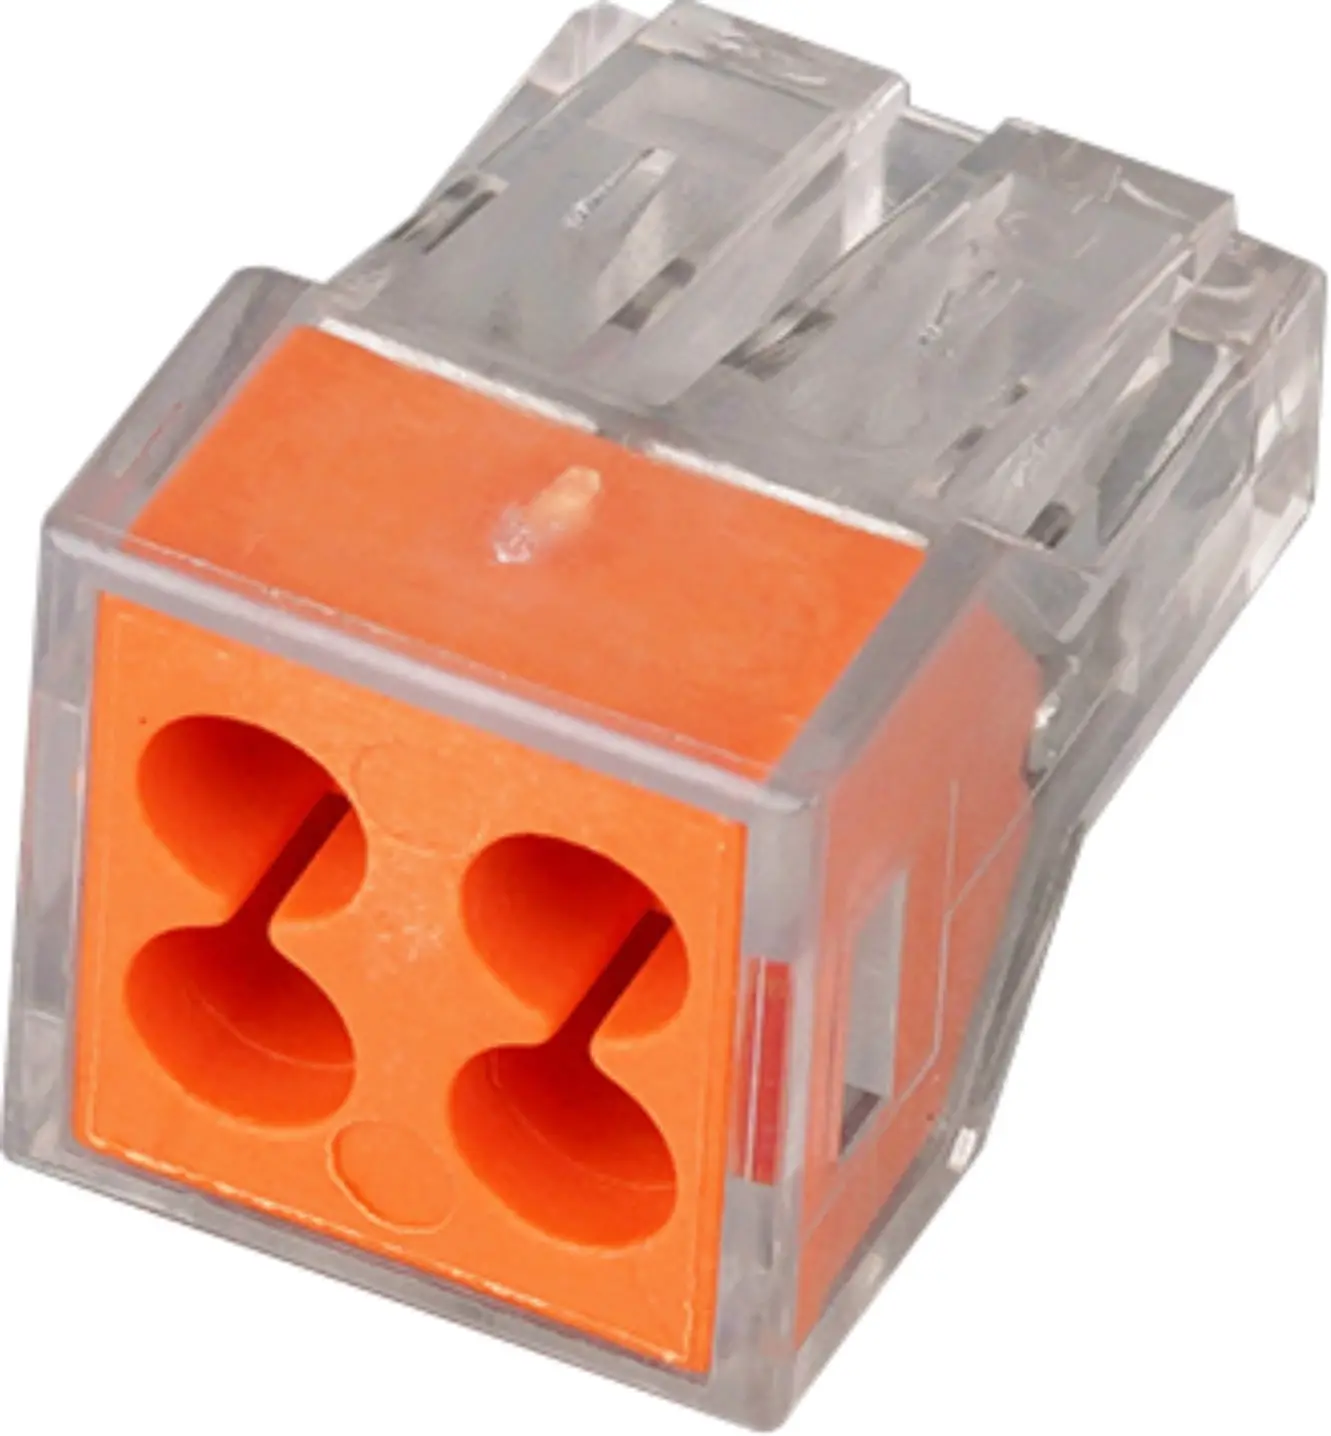 400V 24A 773 Series 4 Way Screwless LED Power Terminal Block Push In Wire Connector For Junction Boxes 773-104